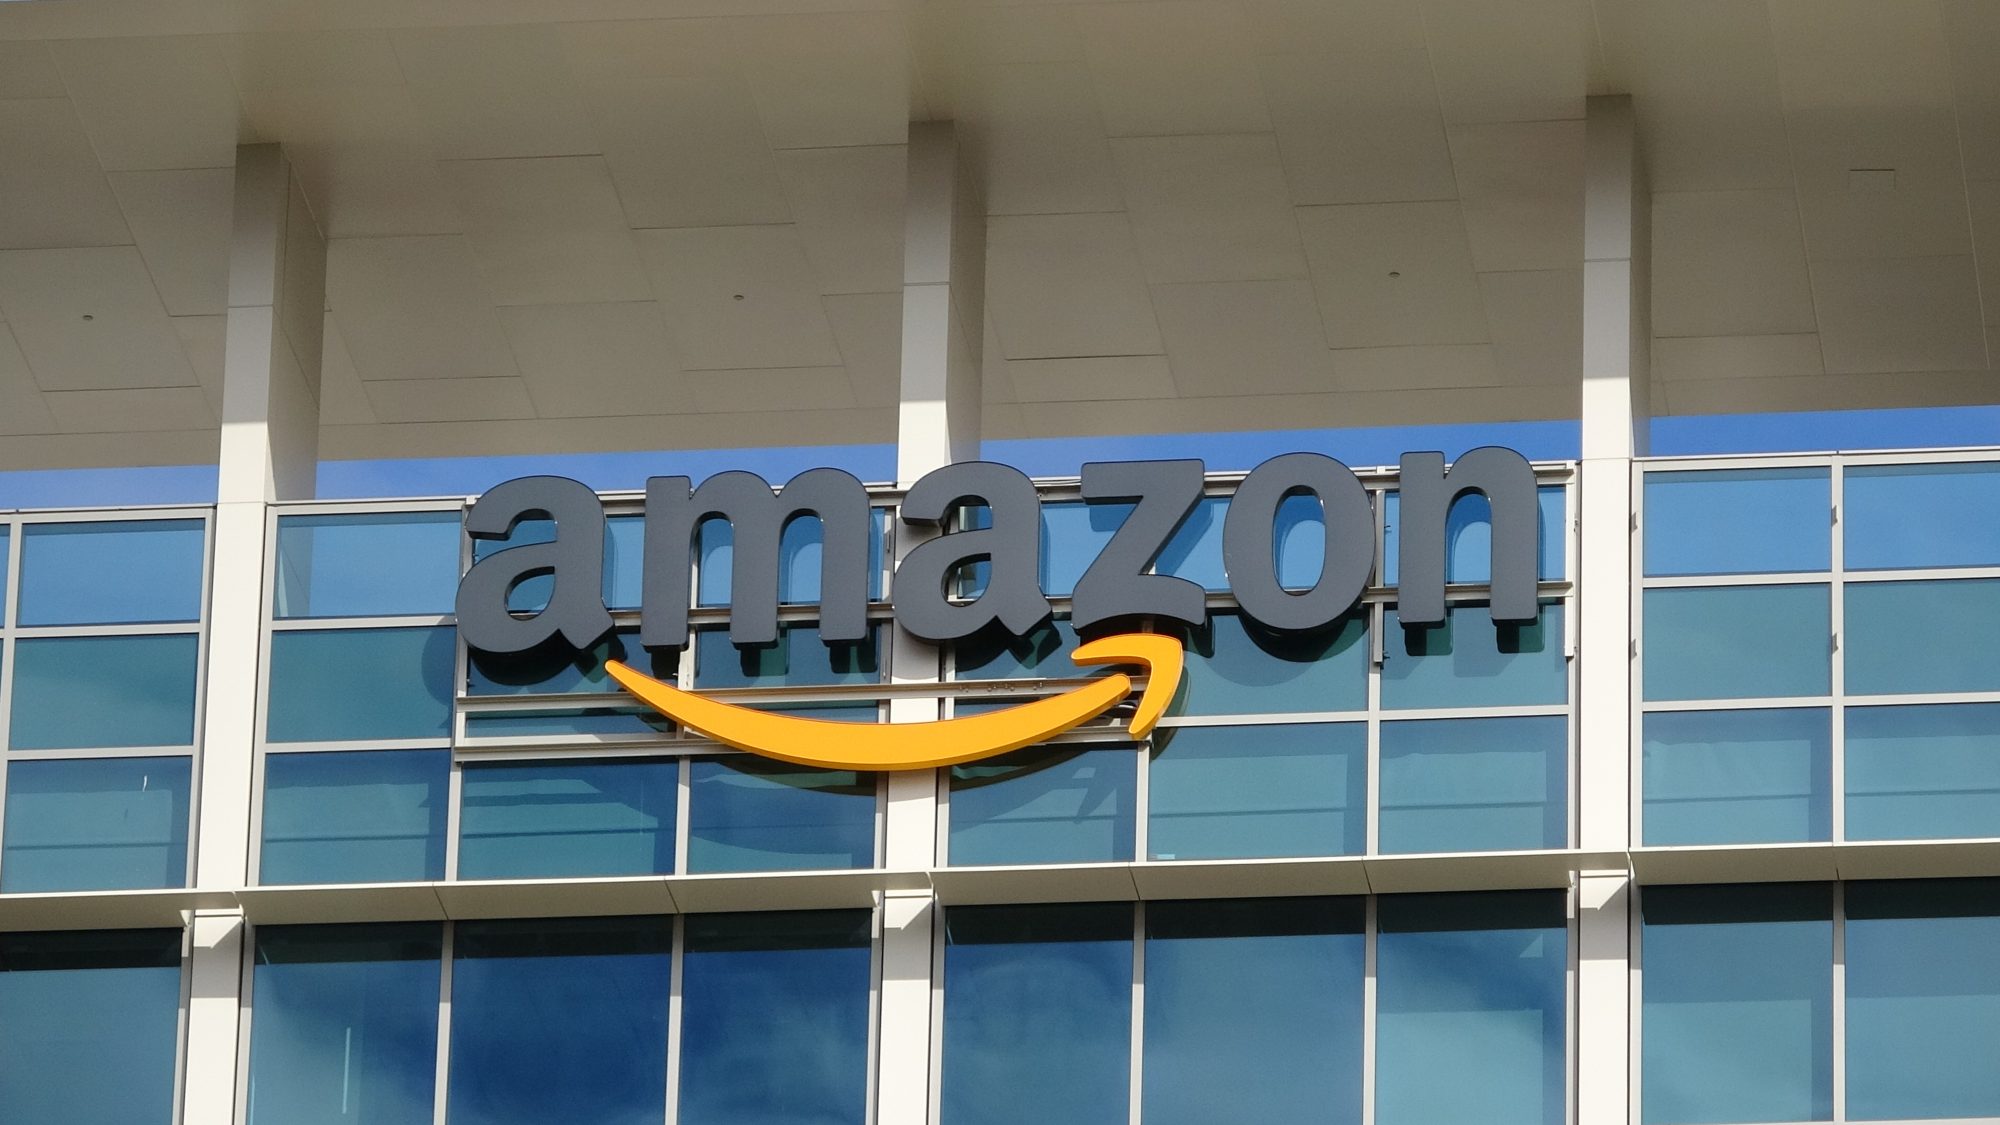 An image of an Amazon sign.